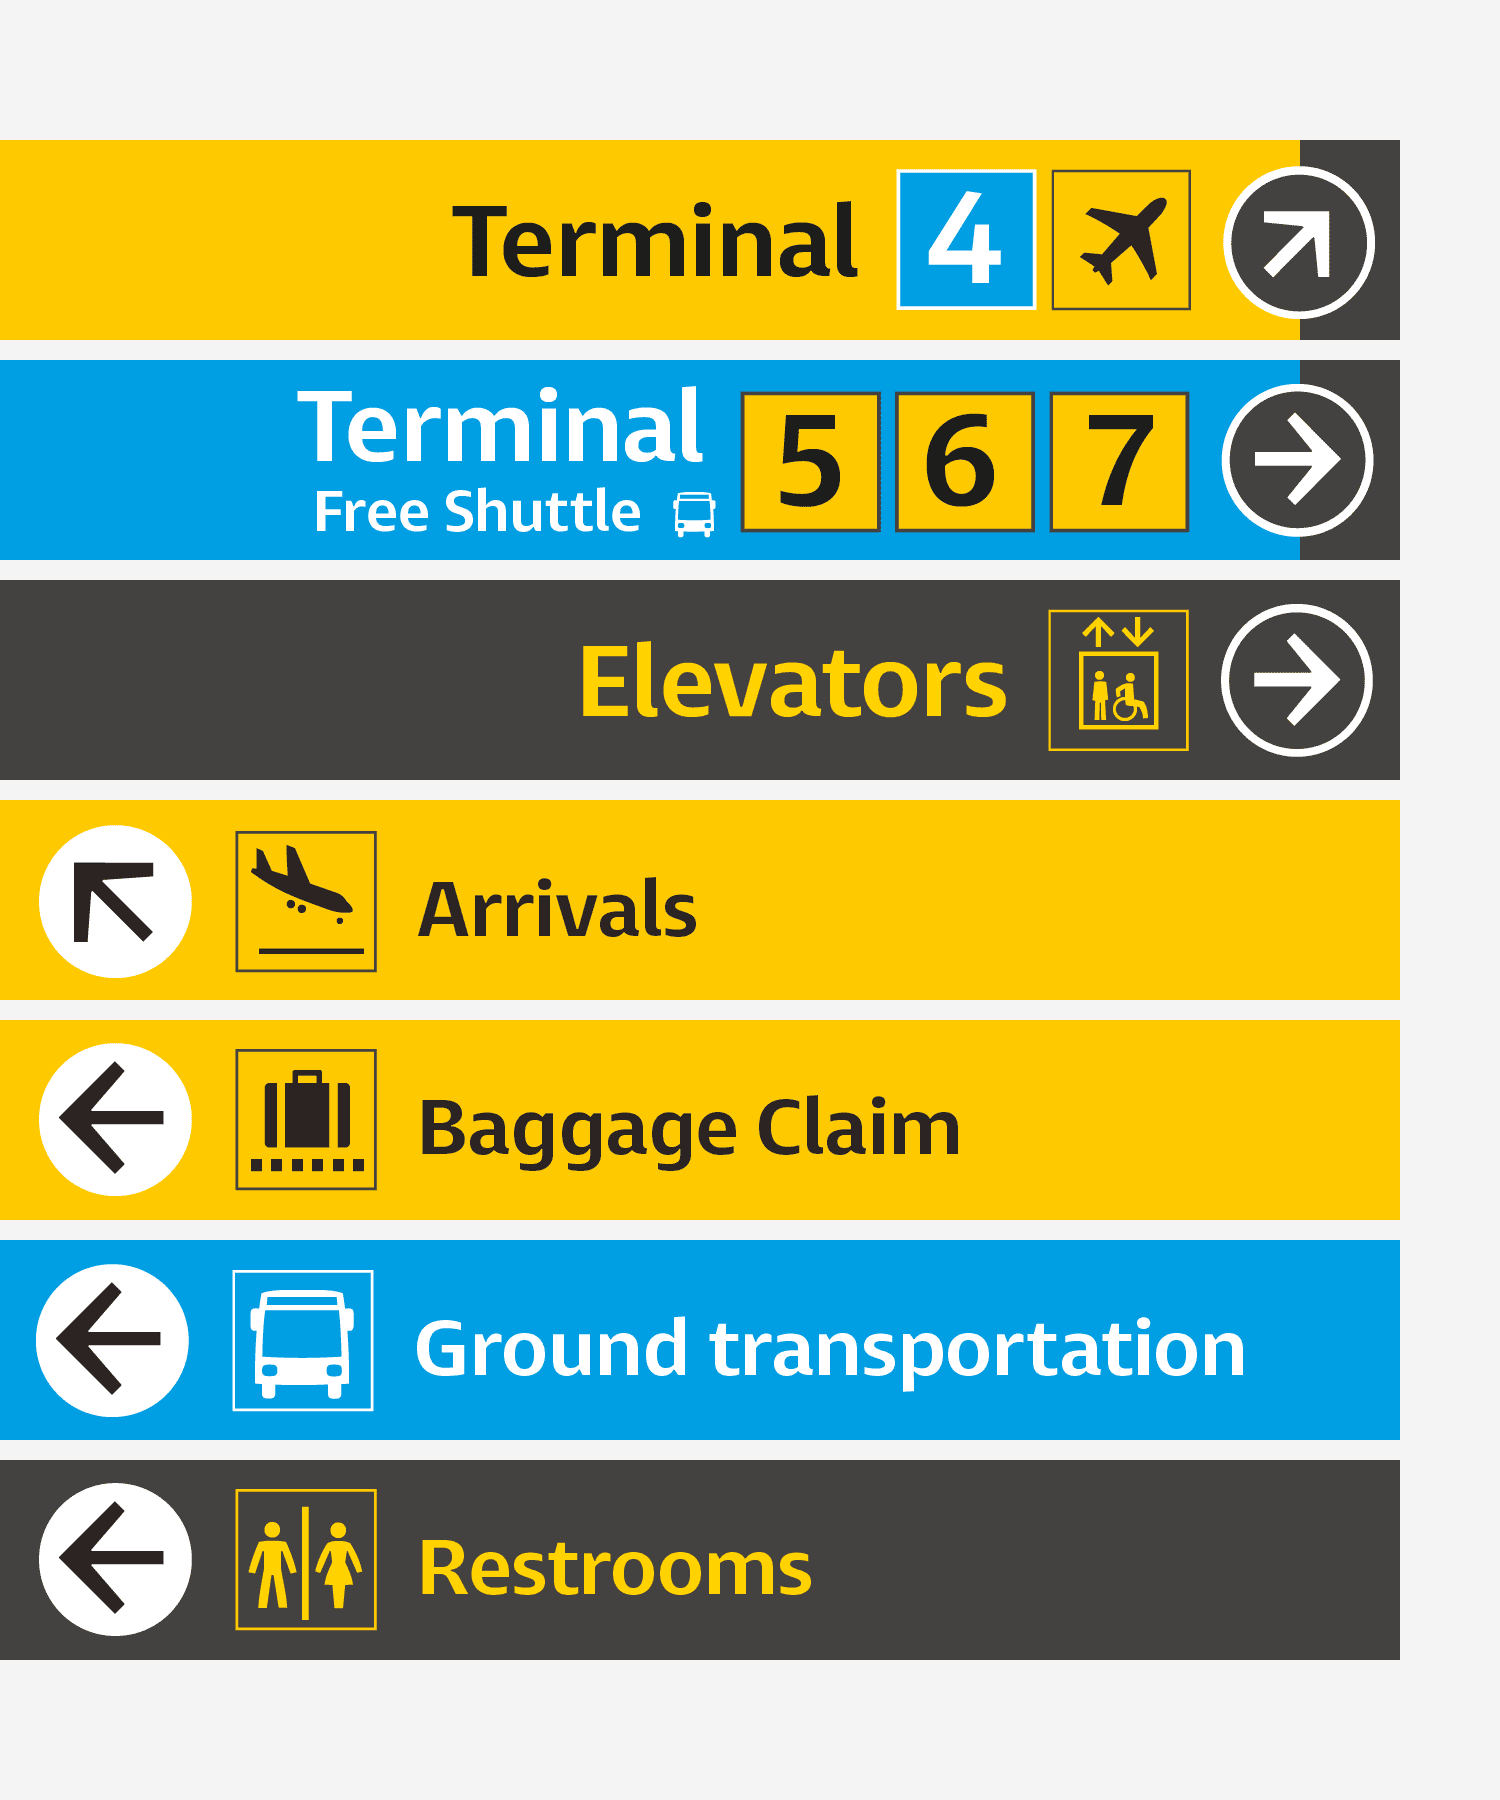 Airport signs using Entorno